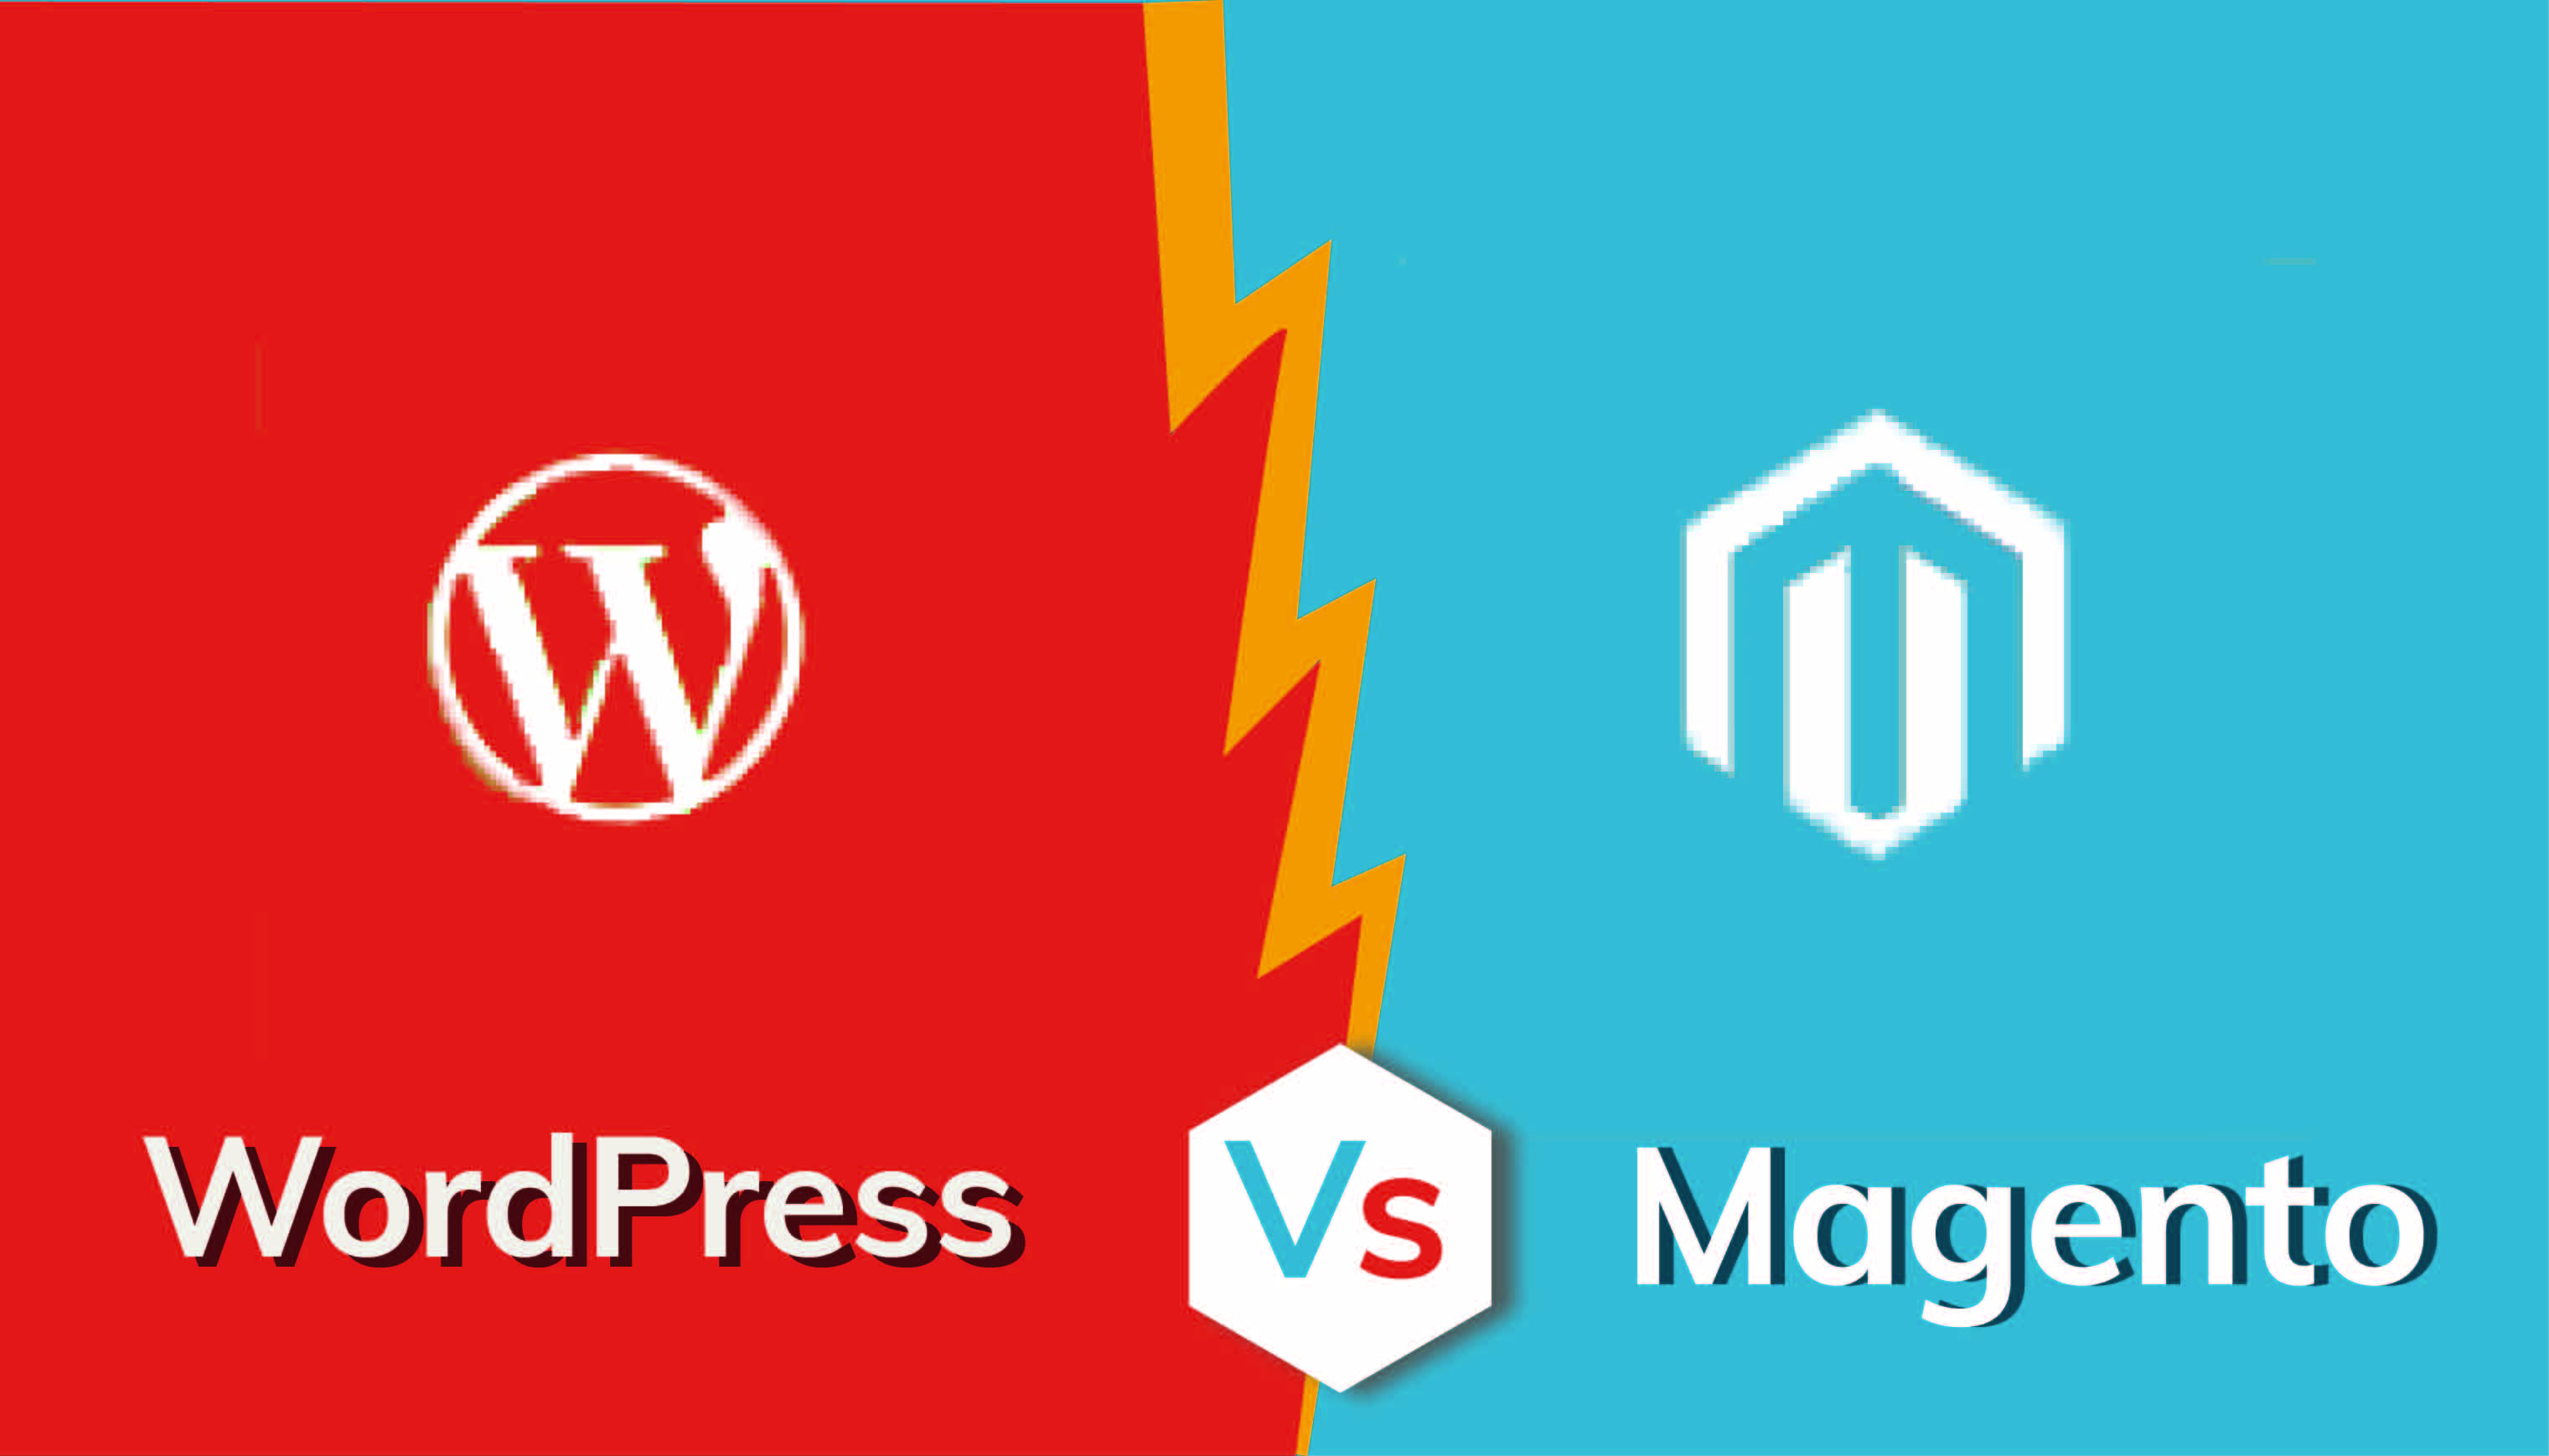 WordPress Vs Magento: Which CMS Should You Choose For An Online Shopping Store?